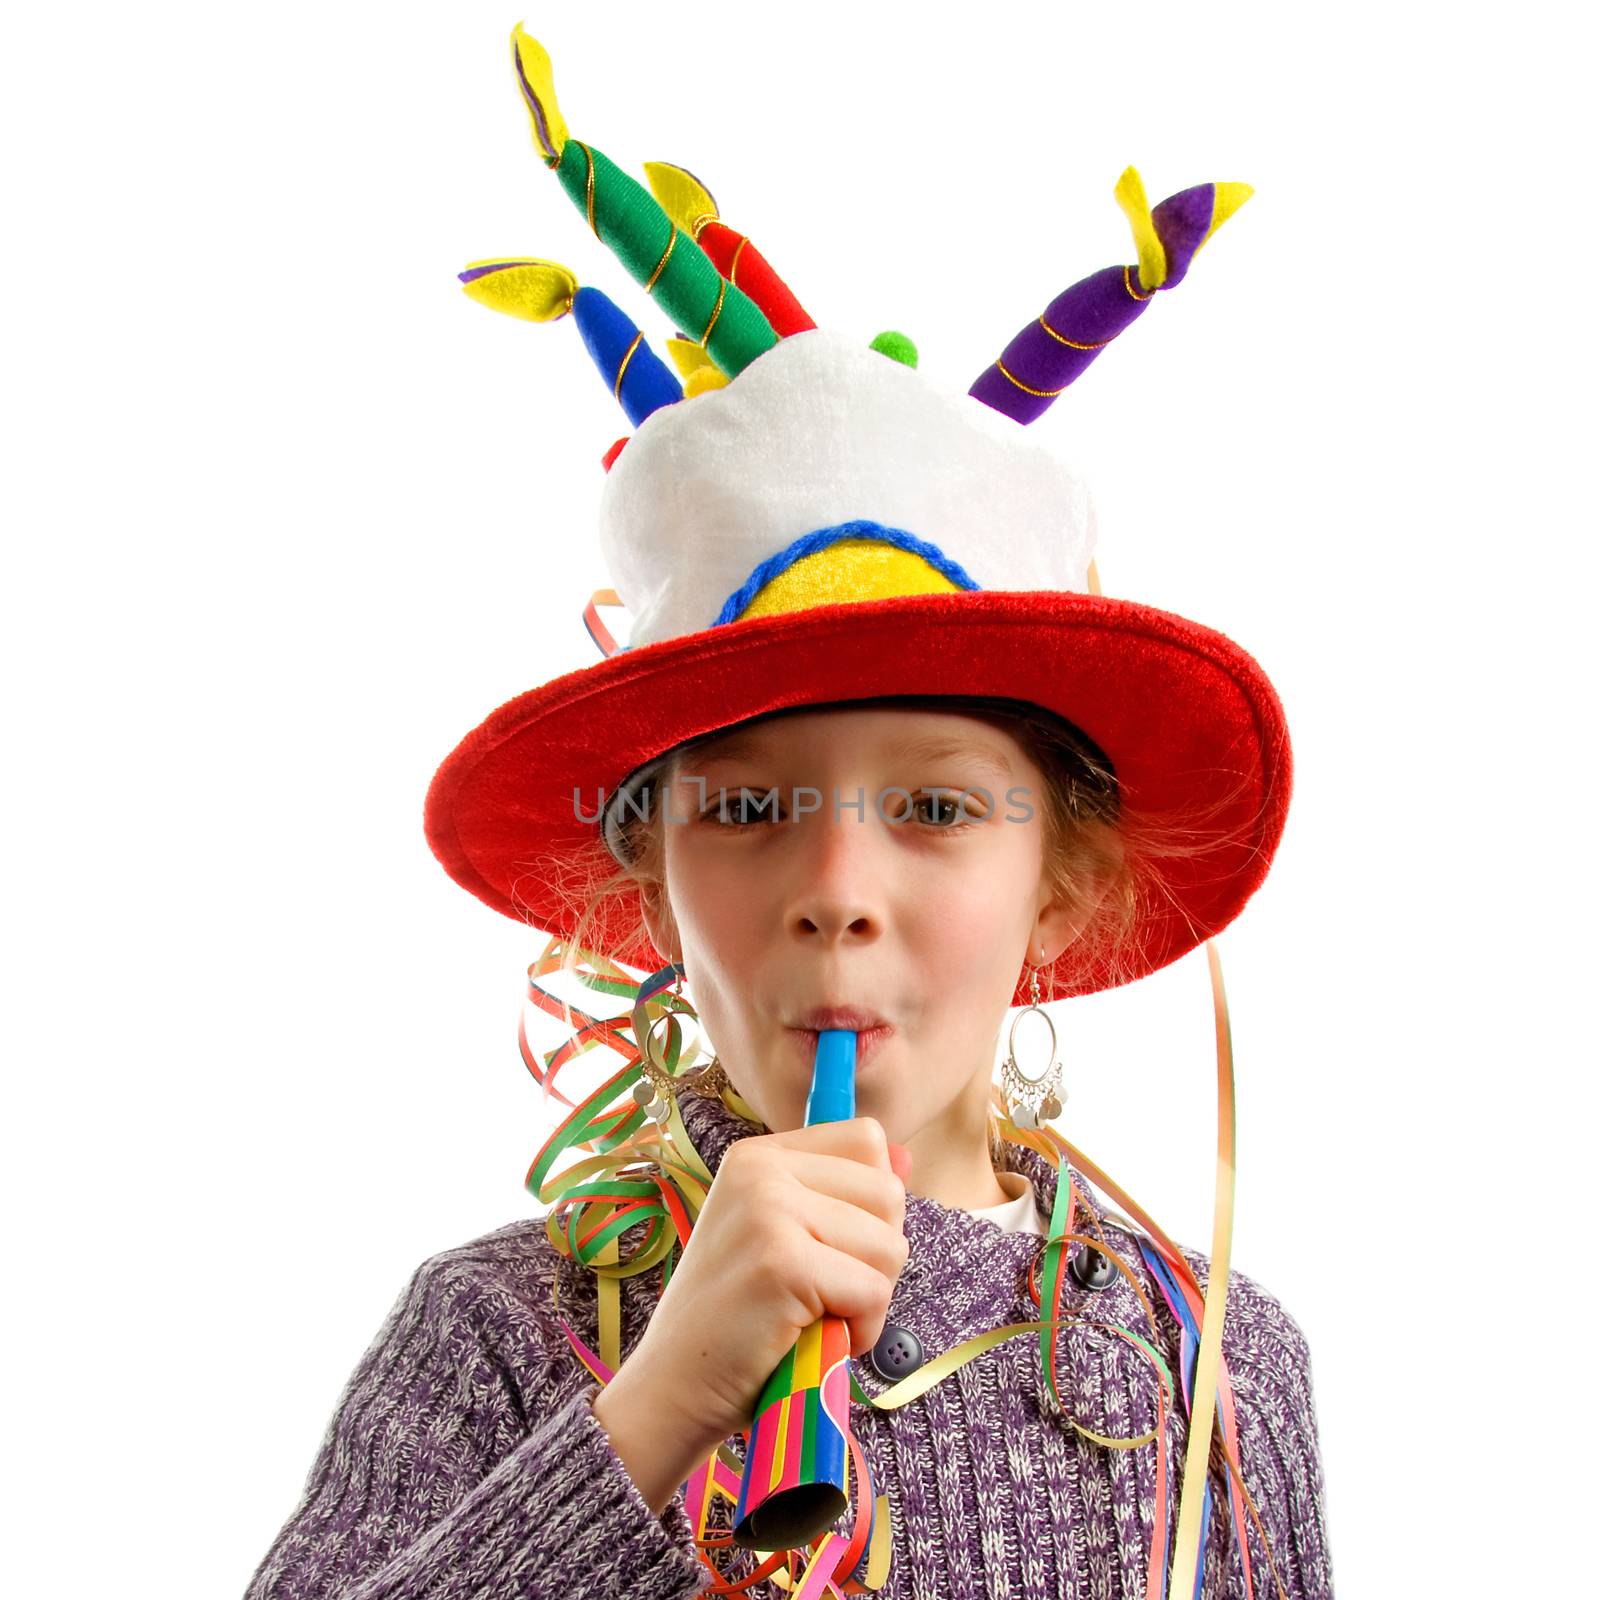 Birthday girl with streamers and horn over white background